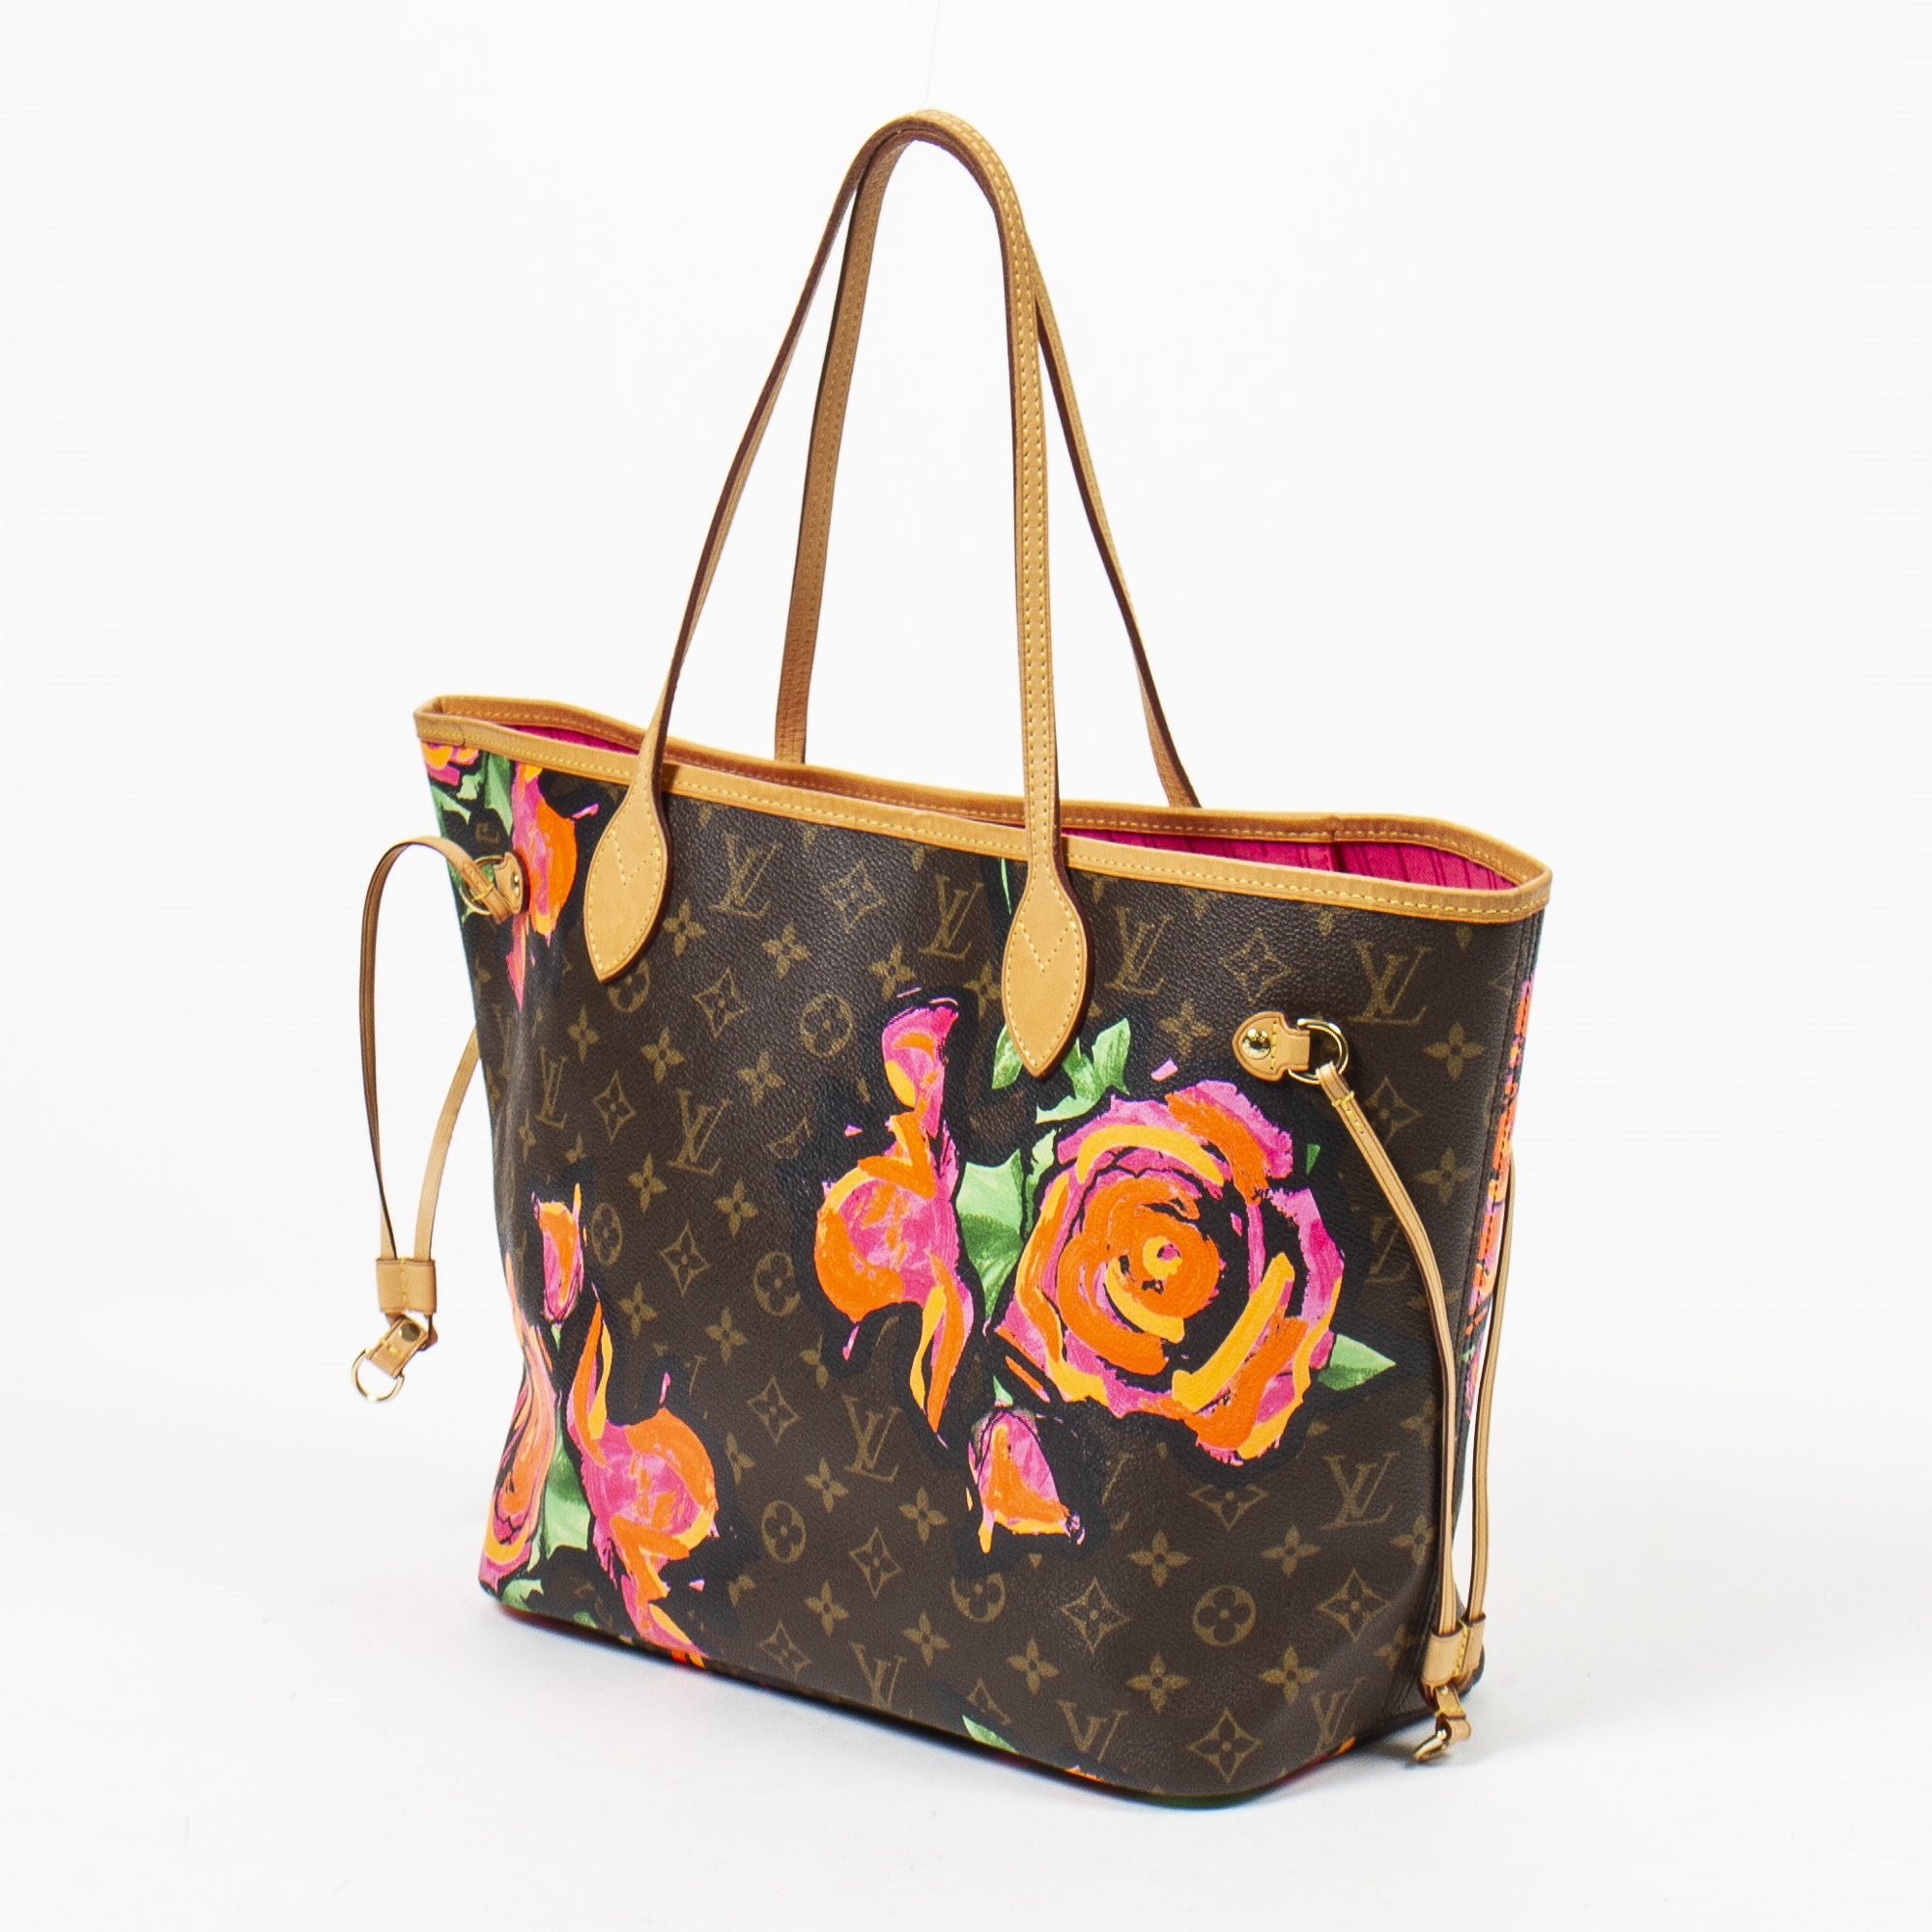 Sold at Auction: Louis Vuitton New Jungle Neverfull Leather Tote Bag Wallet  Pouch - Black Orange